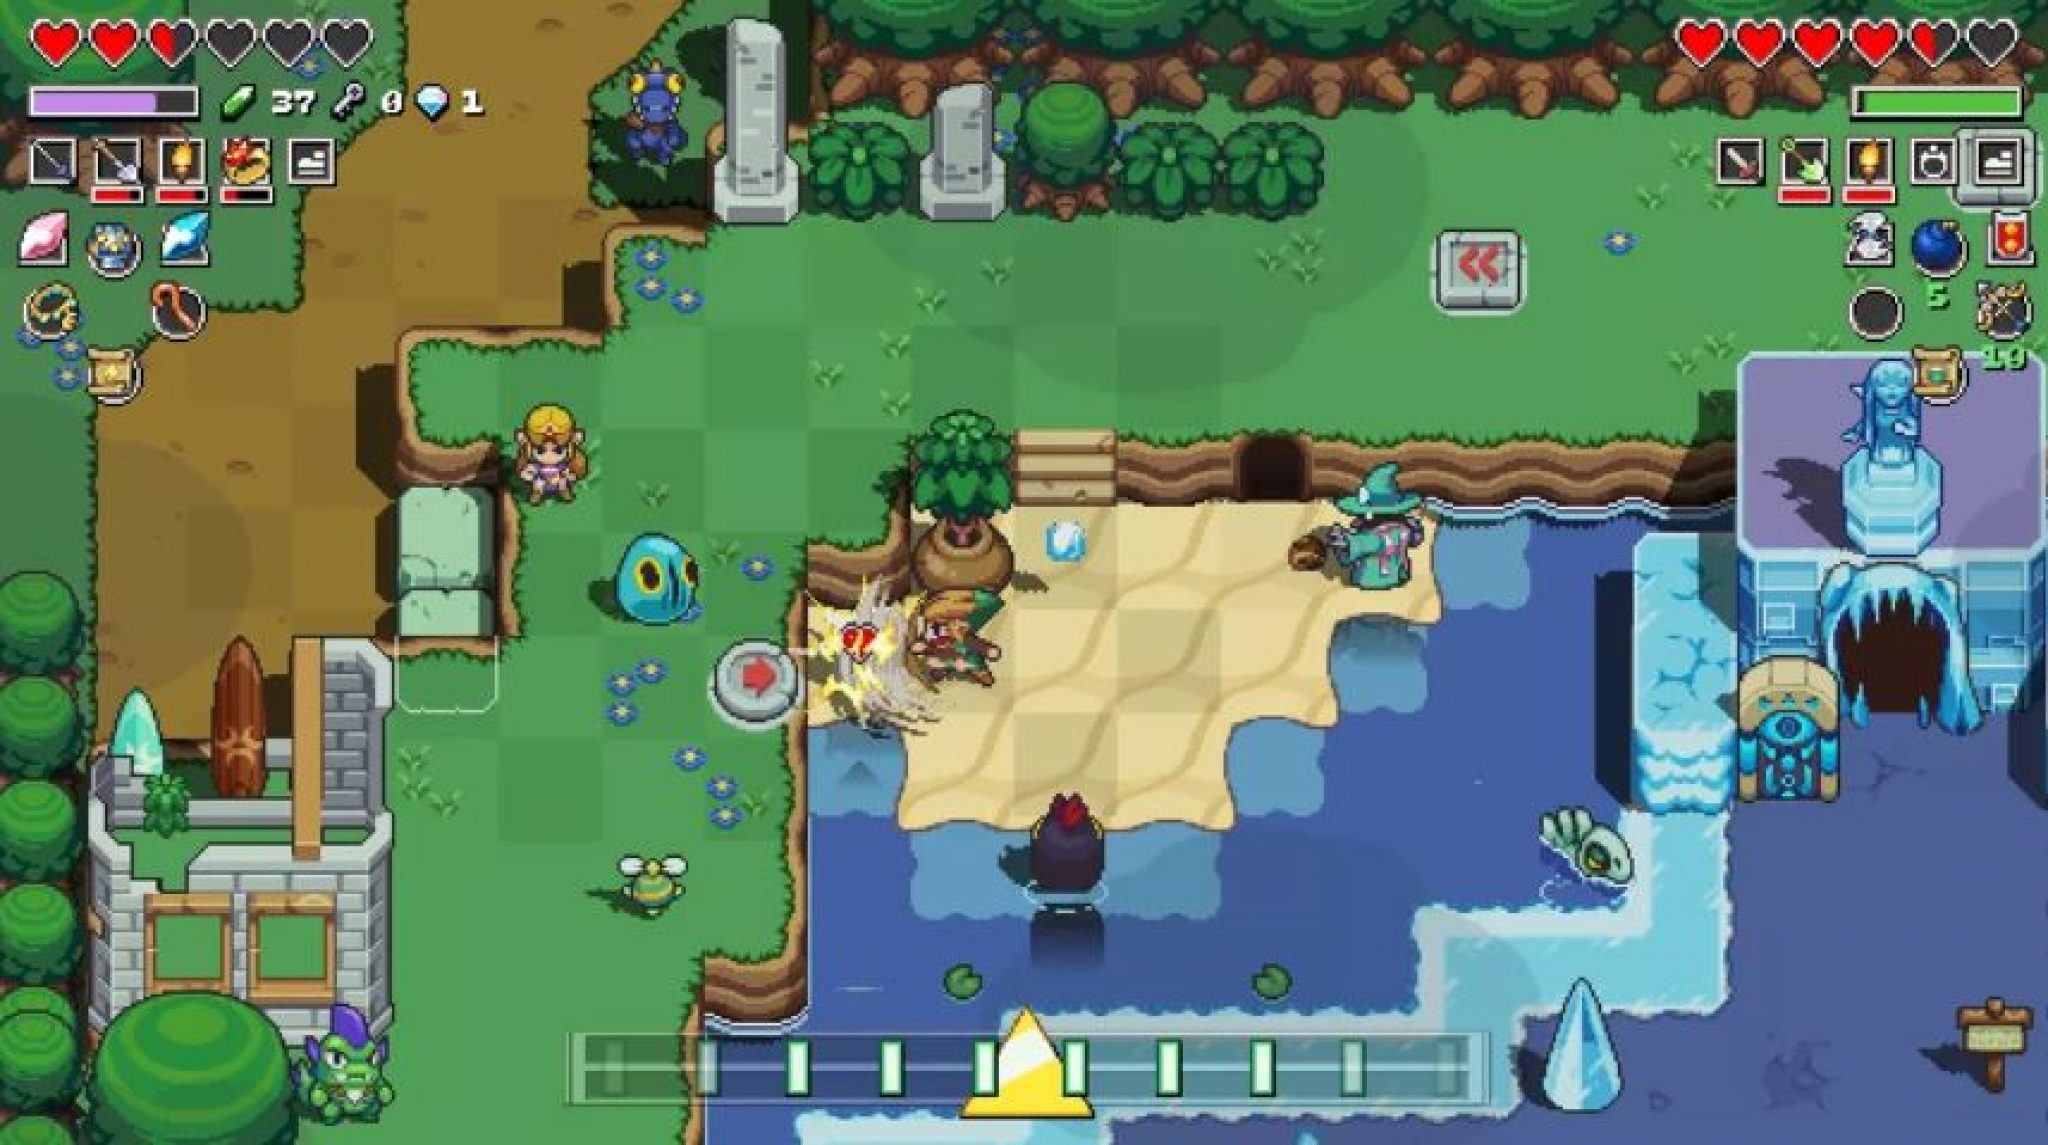 download free cadence of hyrule release date